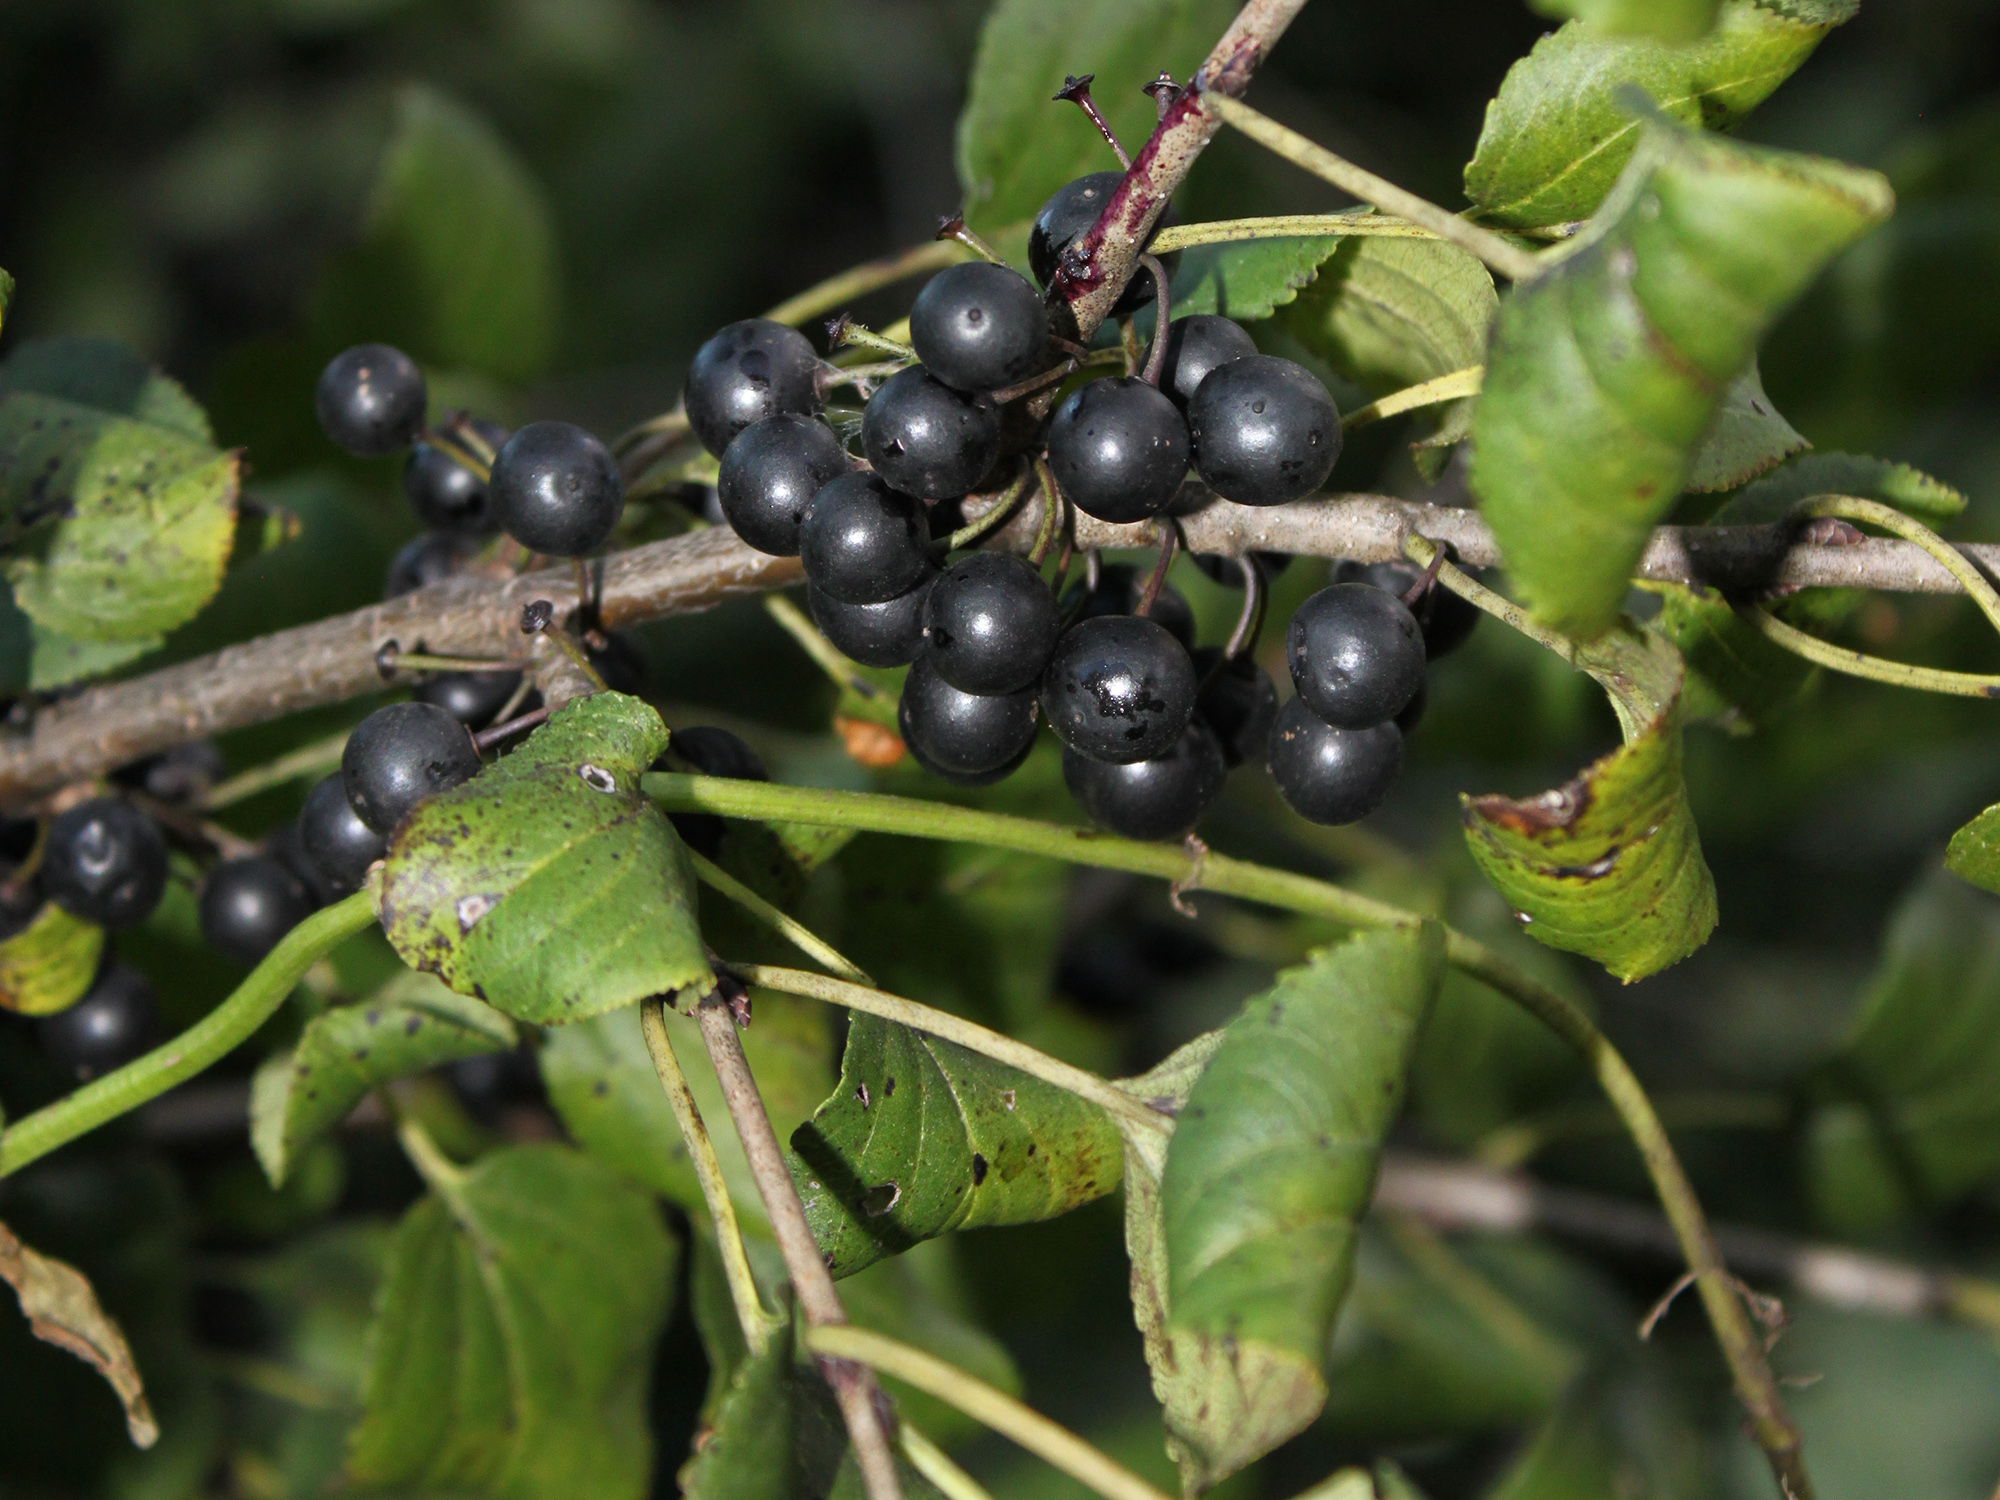 Buckthorn berries ripen to a dark black color in the fall.